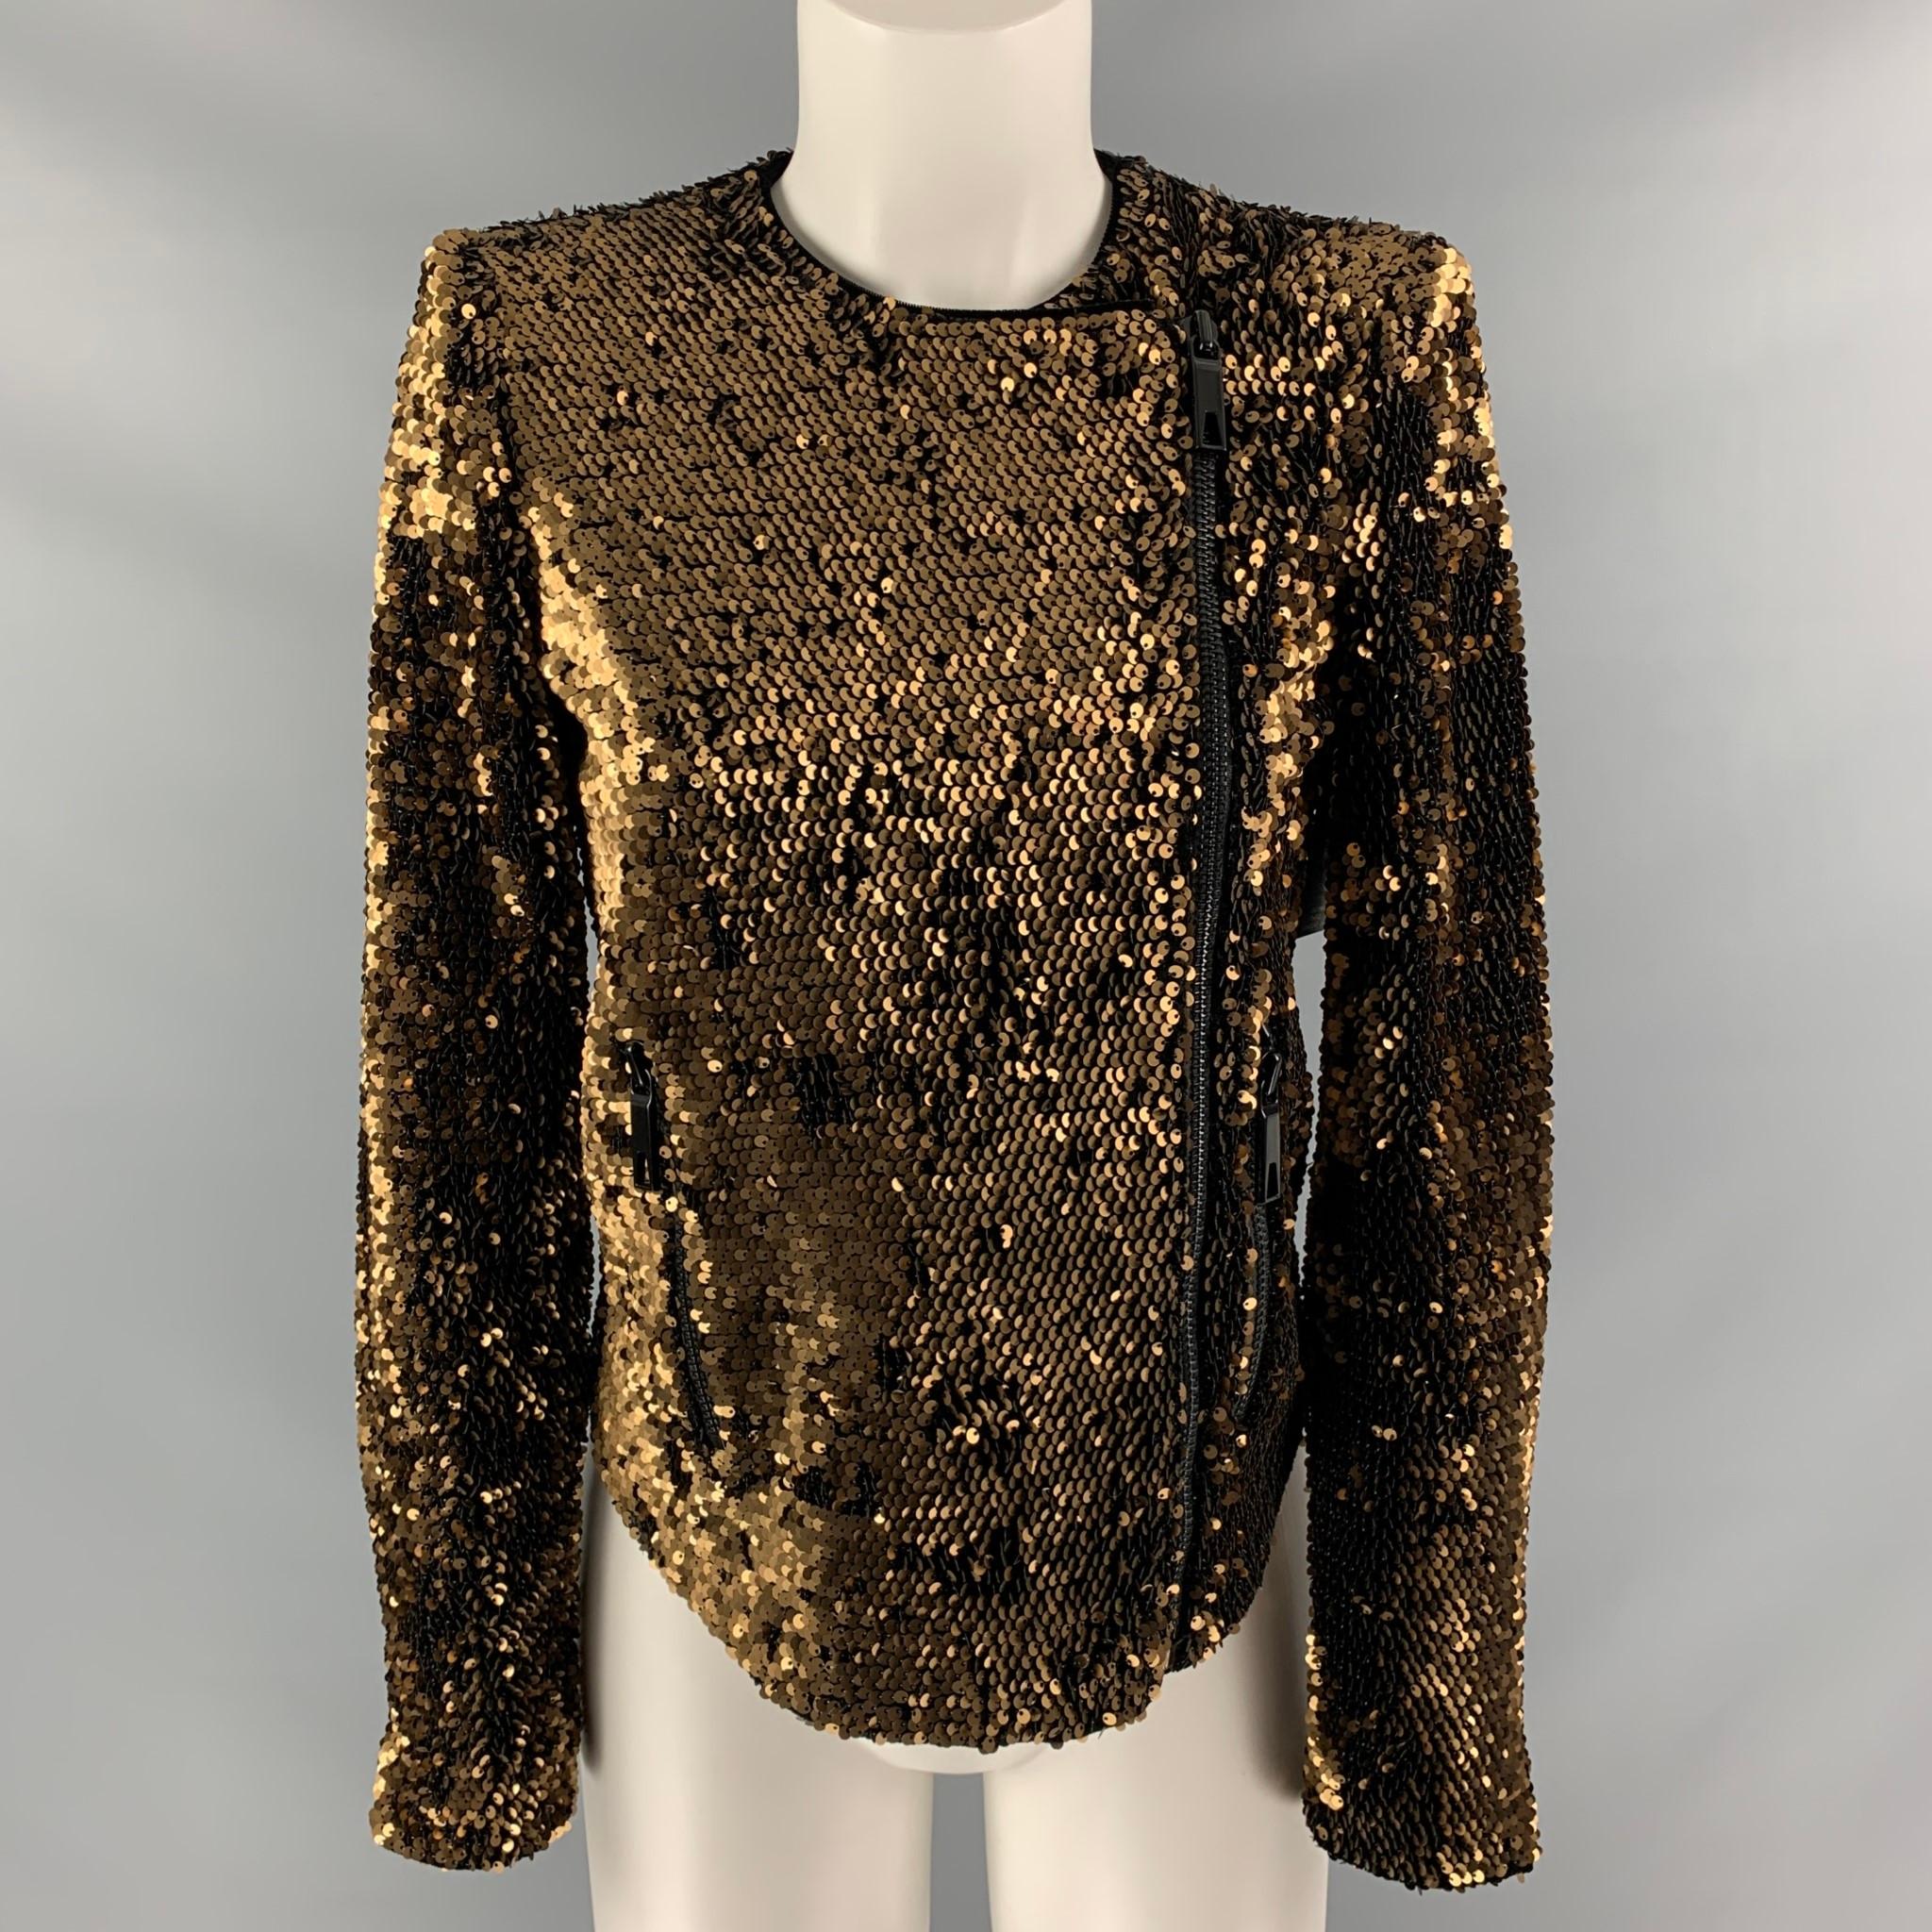 RACHEL ZOE jacket comes in copper polyester and spandex sequined fabric featuring two zip pockets at front and shoulder pads.

New with Tags.
Marked: S

Measurements:
Shoulder: 15 in
Bust: 34 in
Sleeve: 24.5 in
Length: 23 in